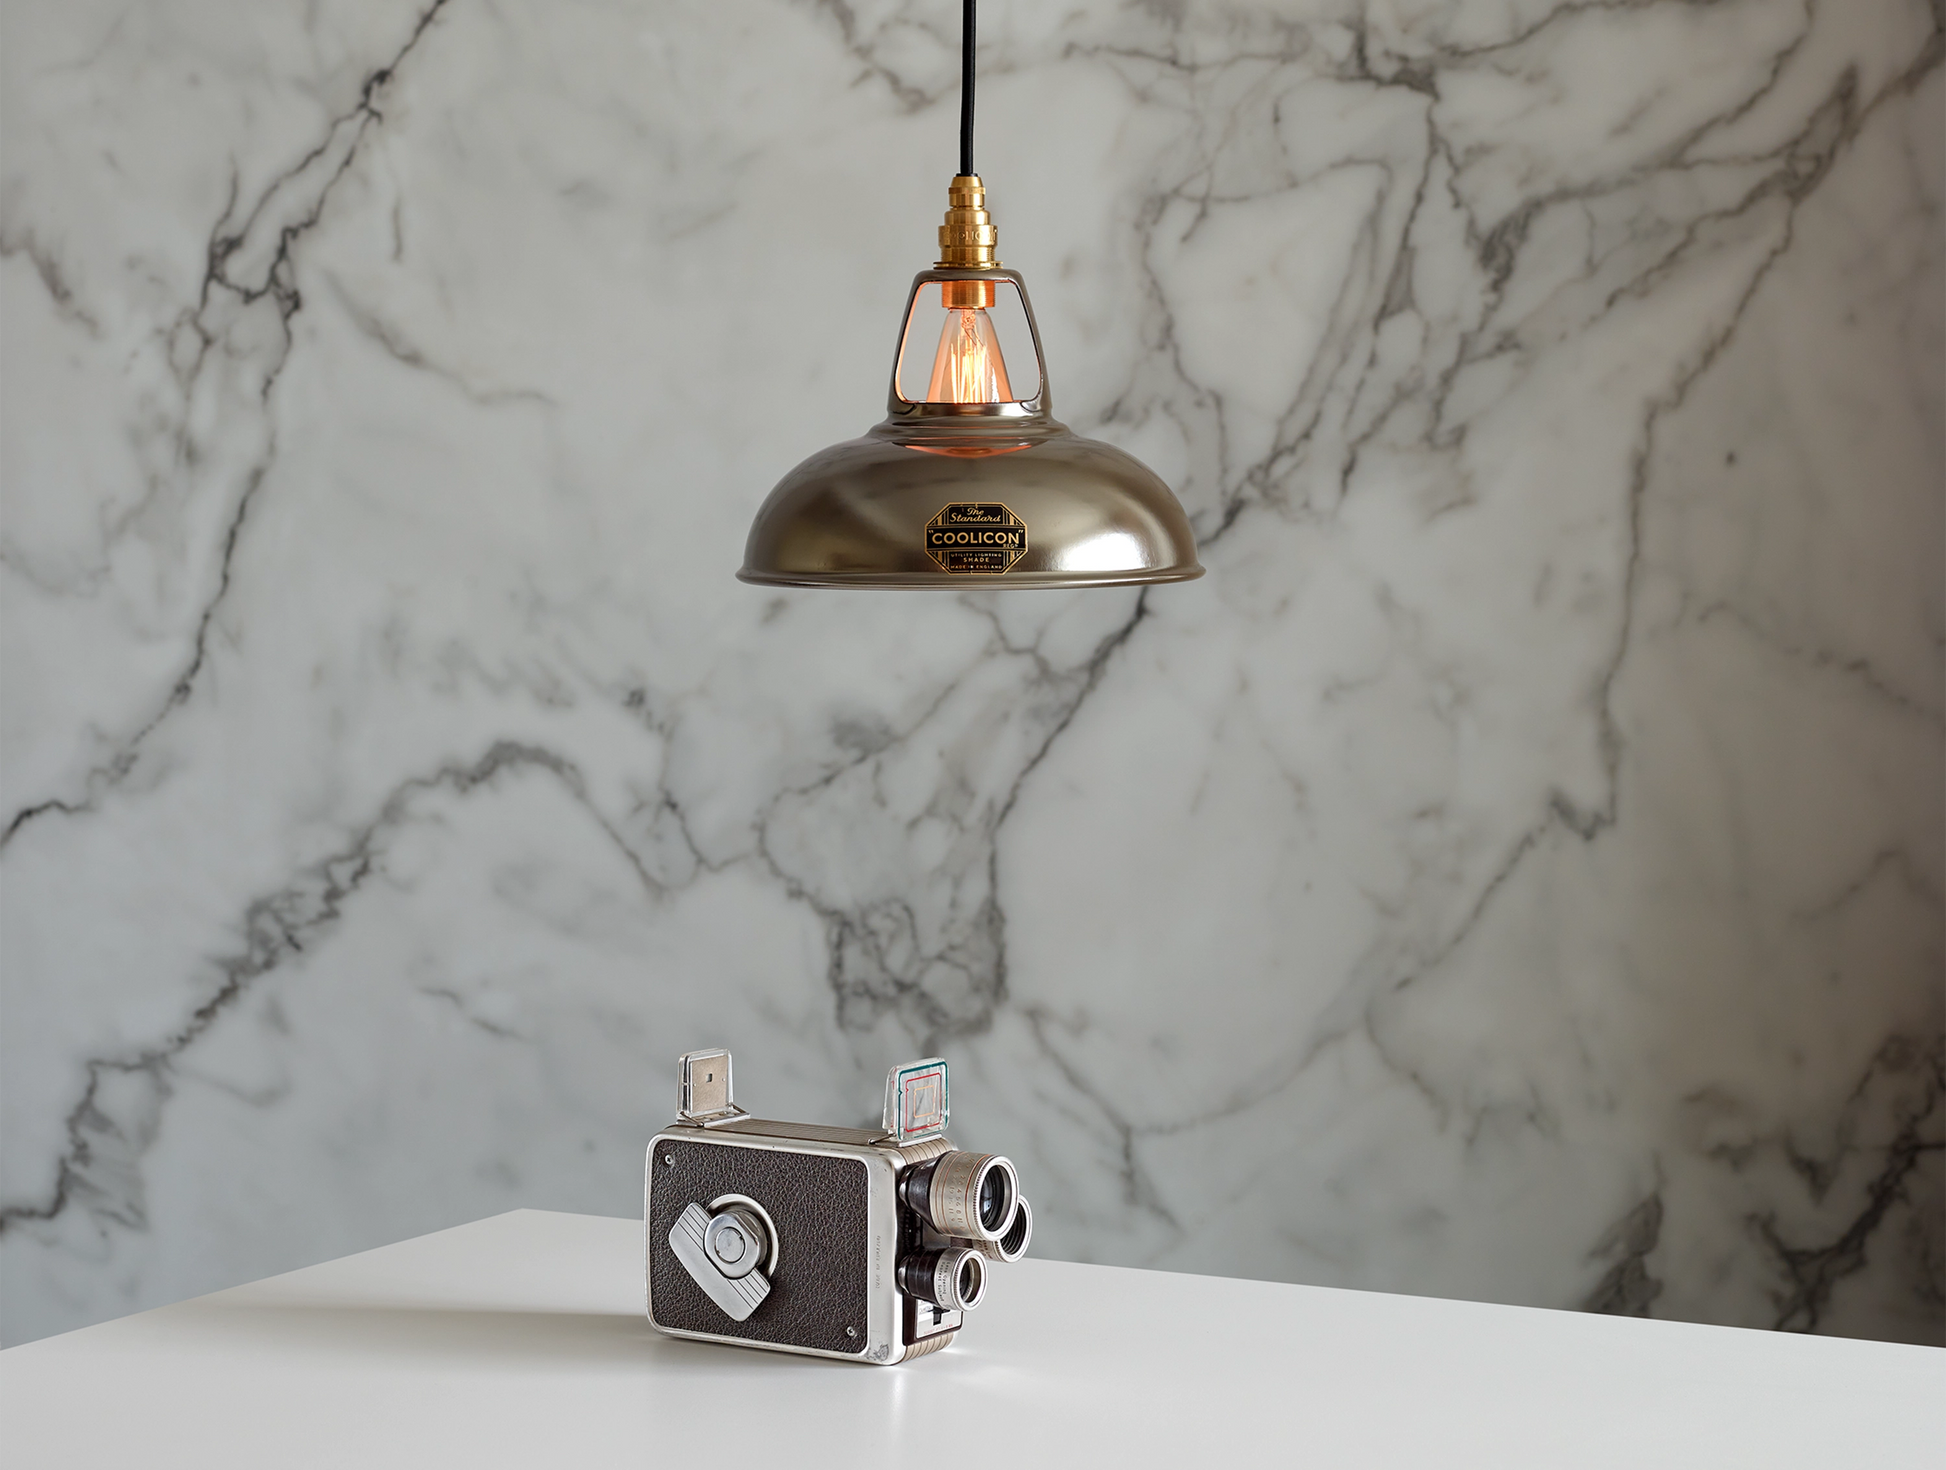 An Original Antinium shade hanging over a table above an old film camera. The background is a marble wallpaper